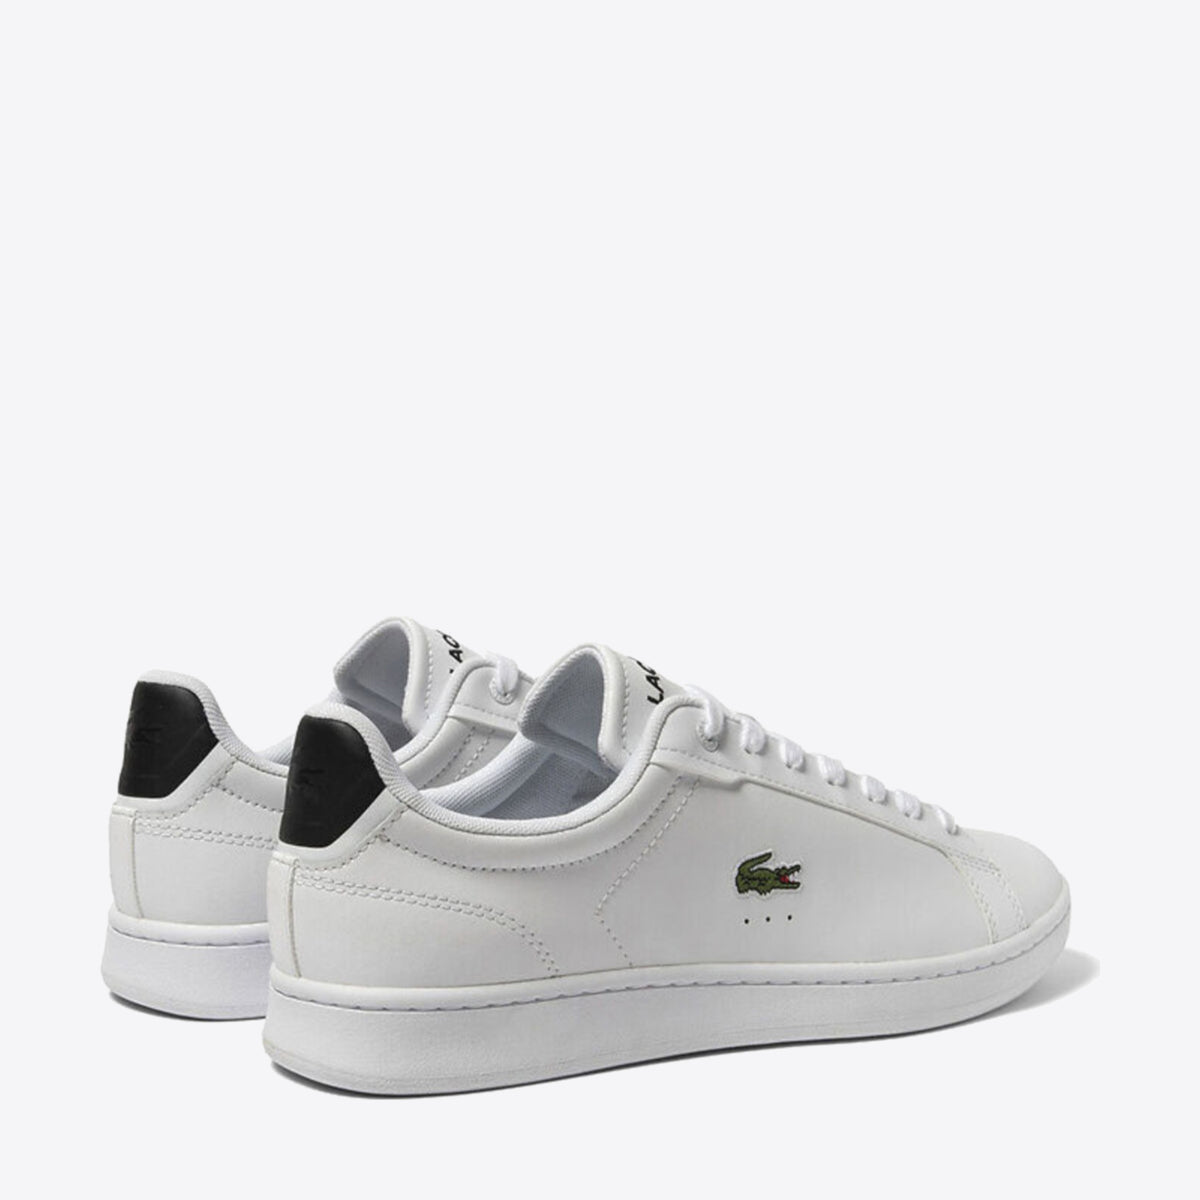 LACOSTE Carnaby Pro 123 White/Black - Image 3